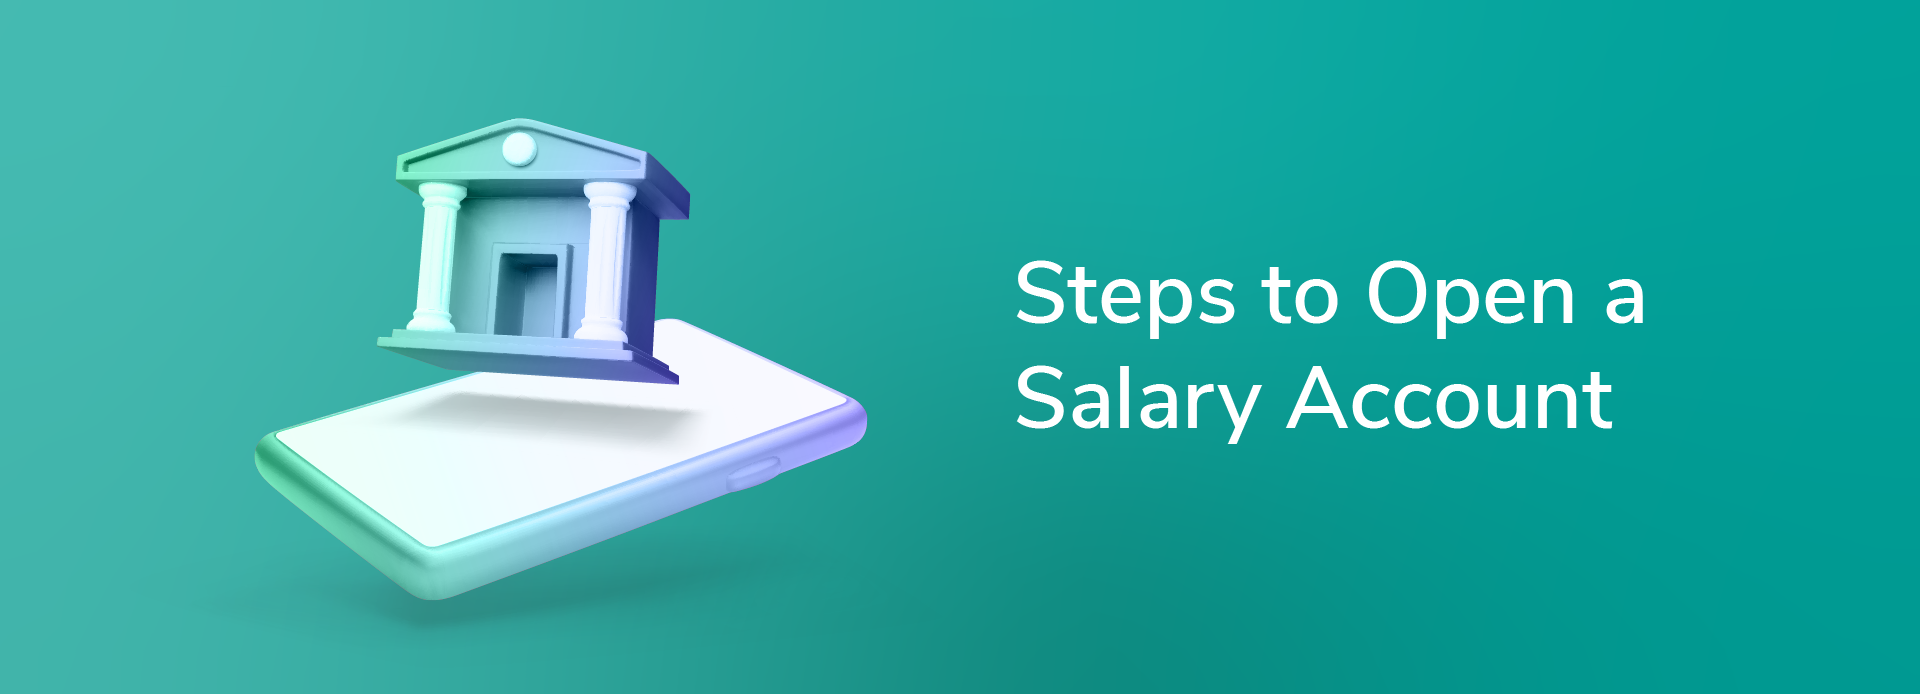 Open A Salary Account In 3 Easy Steps